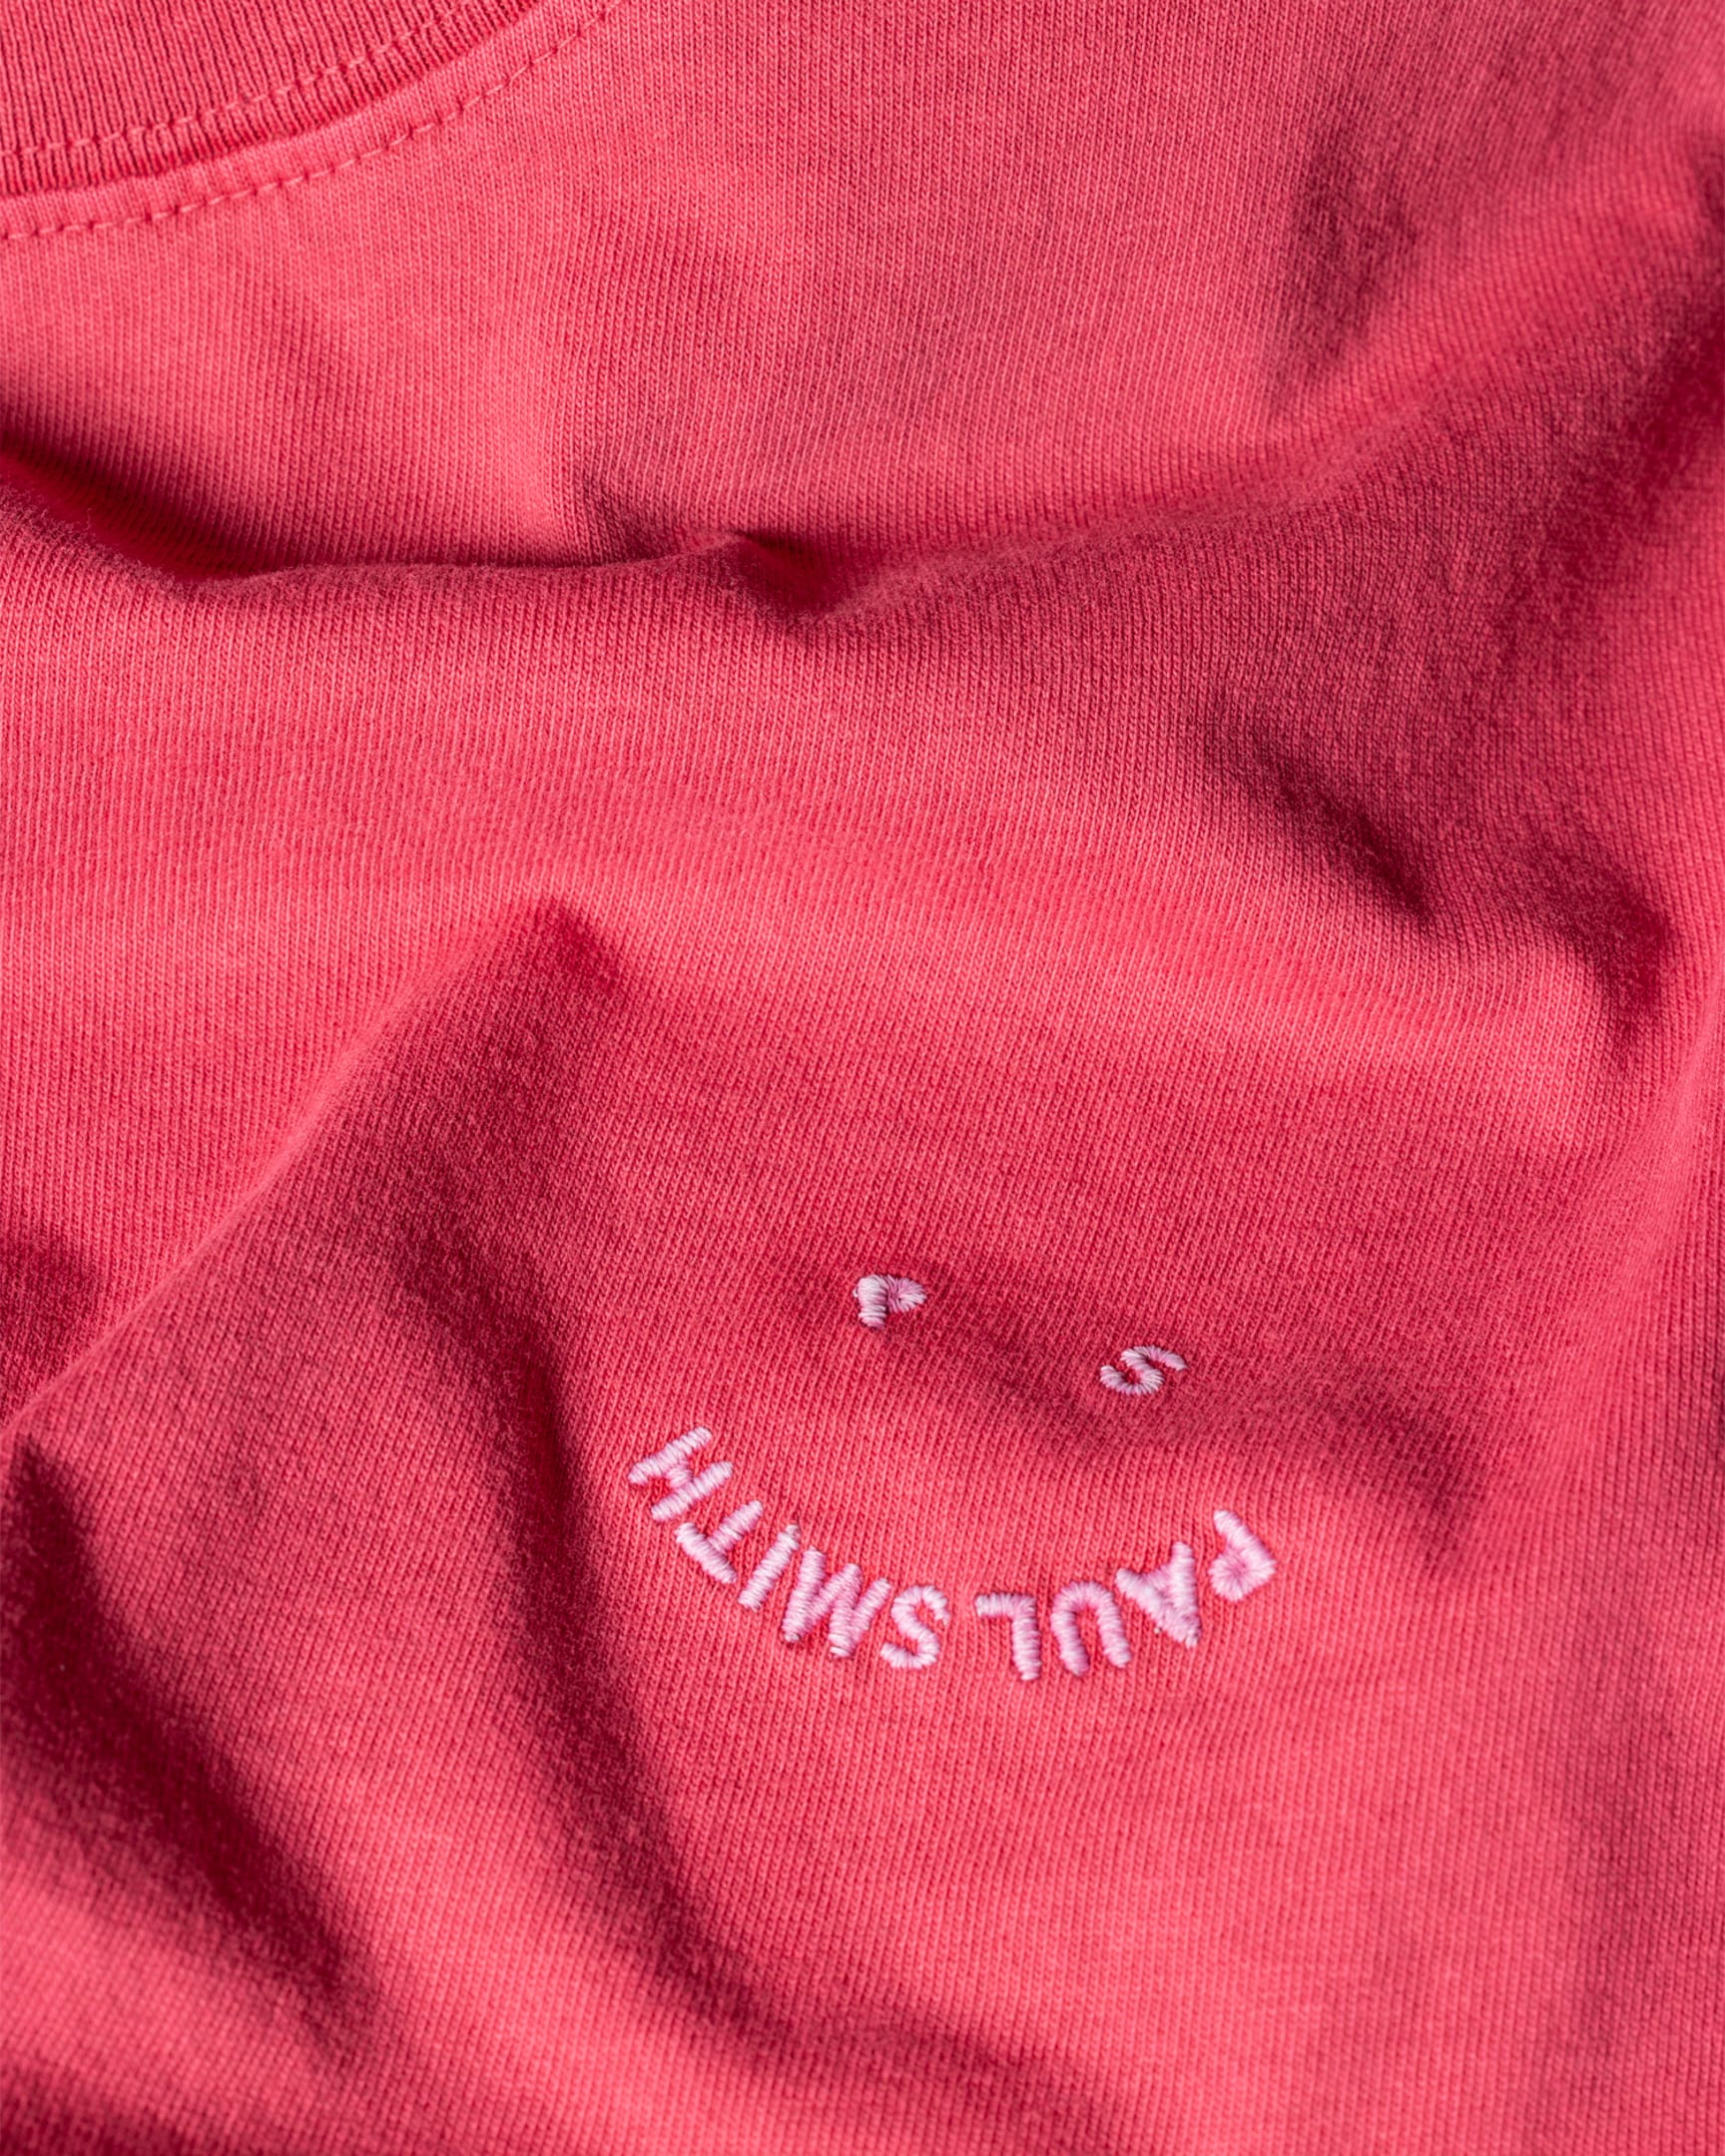 Detail View - Washed Red Cotton 'Happy' T-Shirt Paul Smith